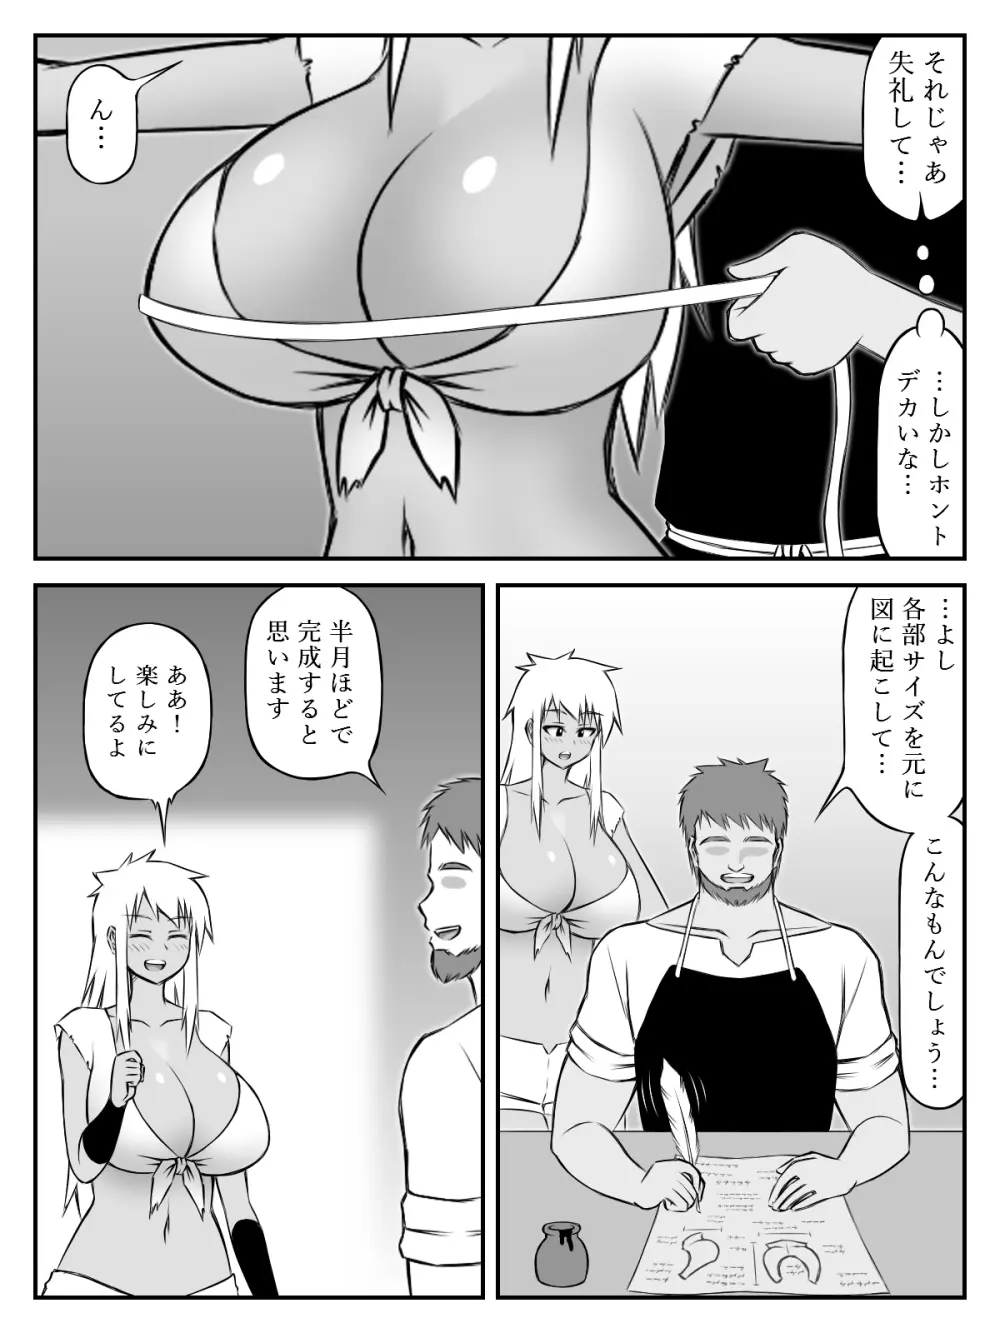 [SiD - Sato in Dreams -] 爆乳(おっぱい)と胸甲(アーマー) - page6